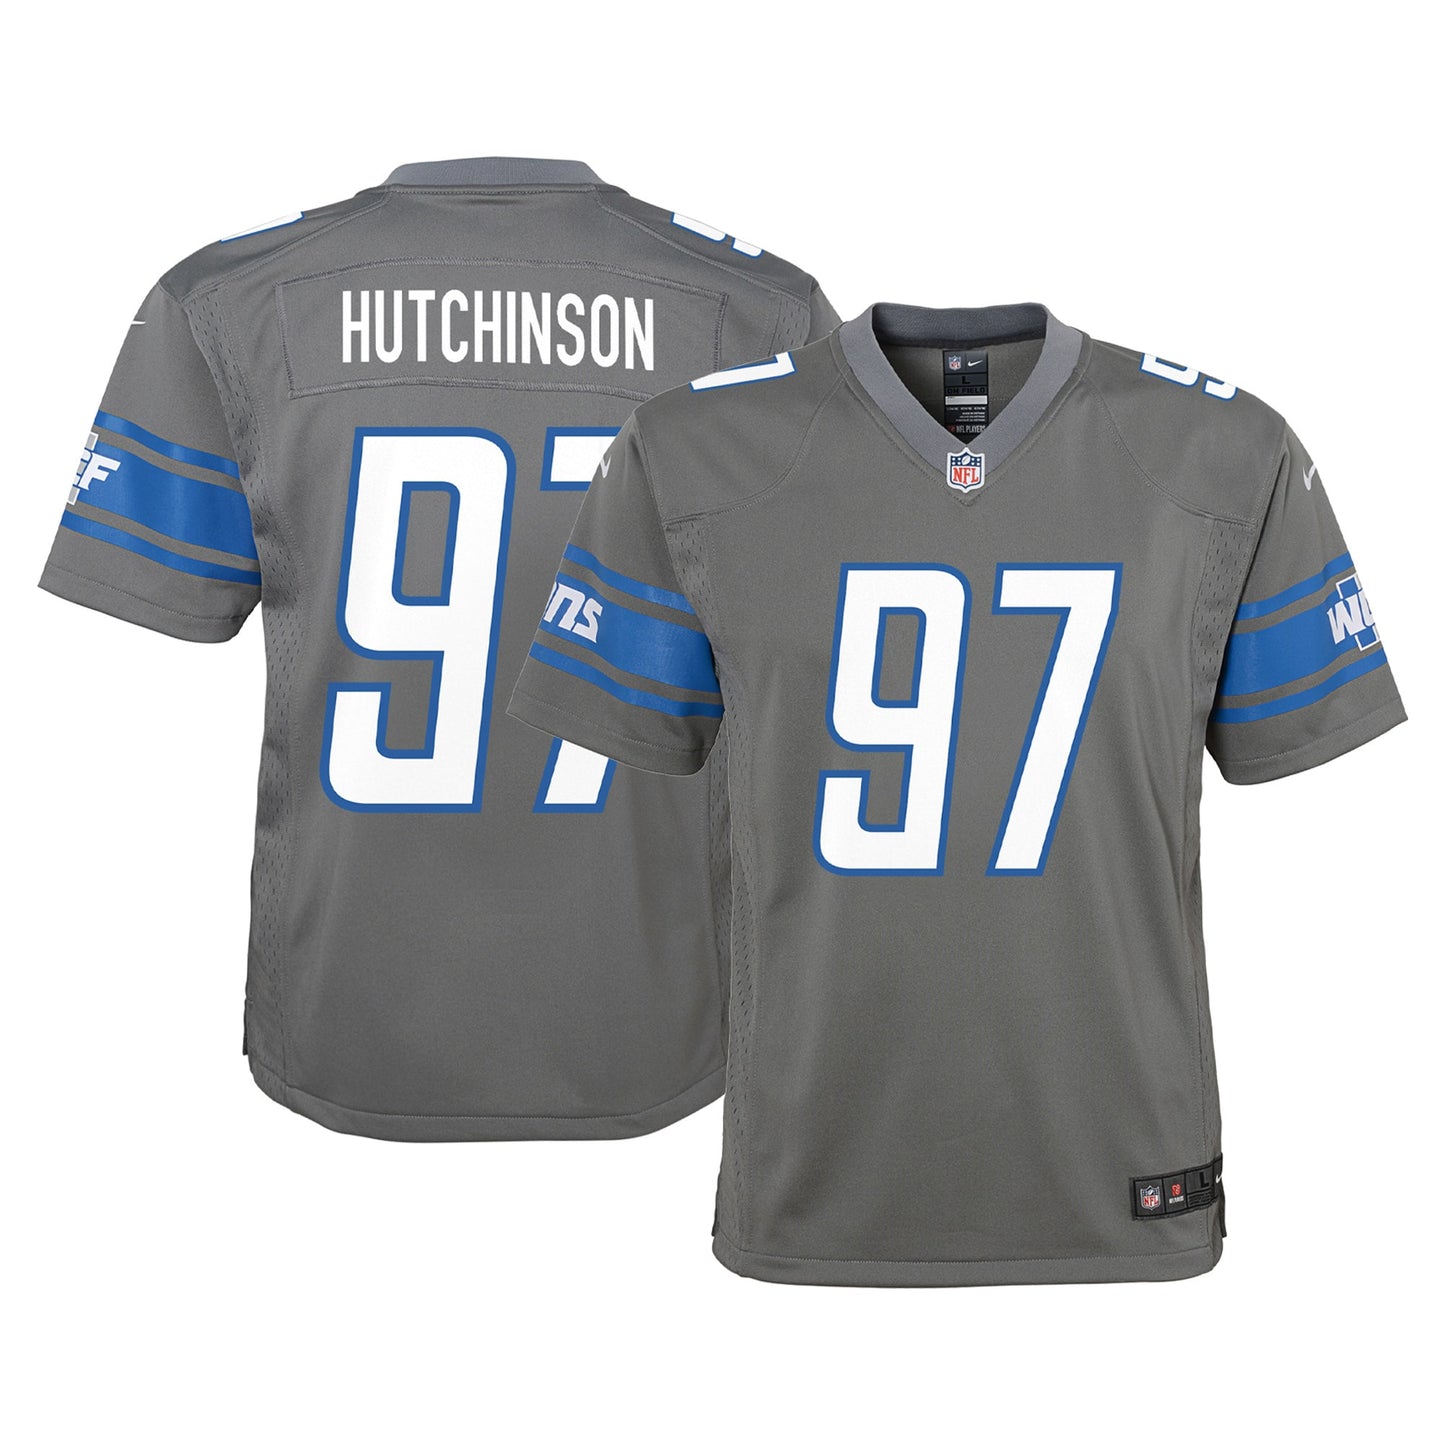 Aidan Hutchinson Detroit Lions Nike Youth Game Jersey - Steel